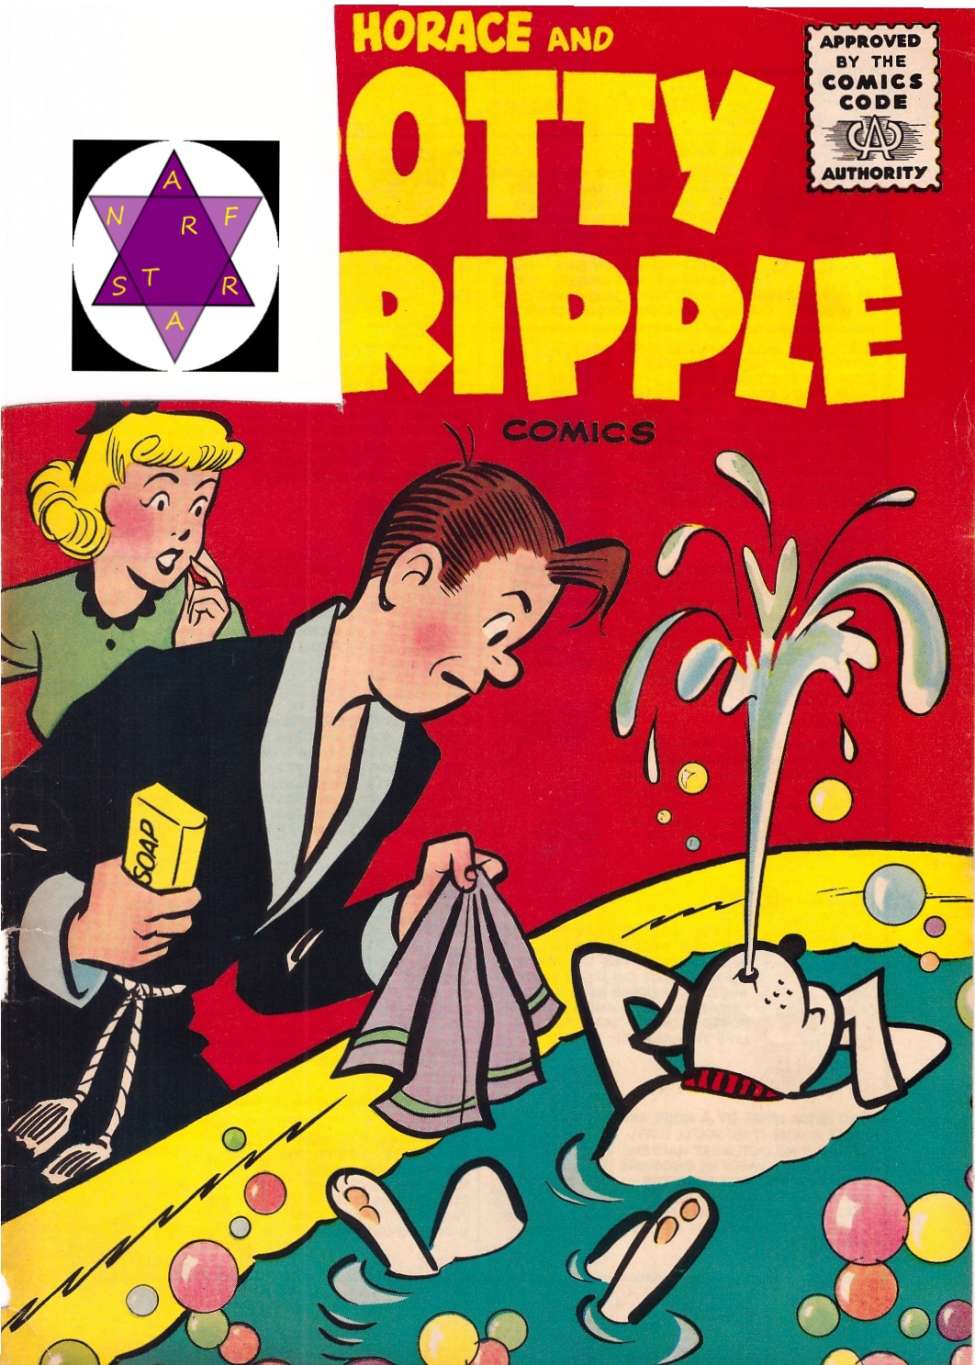 Comic Book Cover For Horace & Dotty Dripple 42